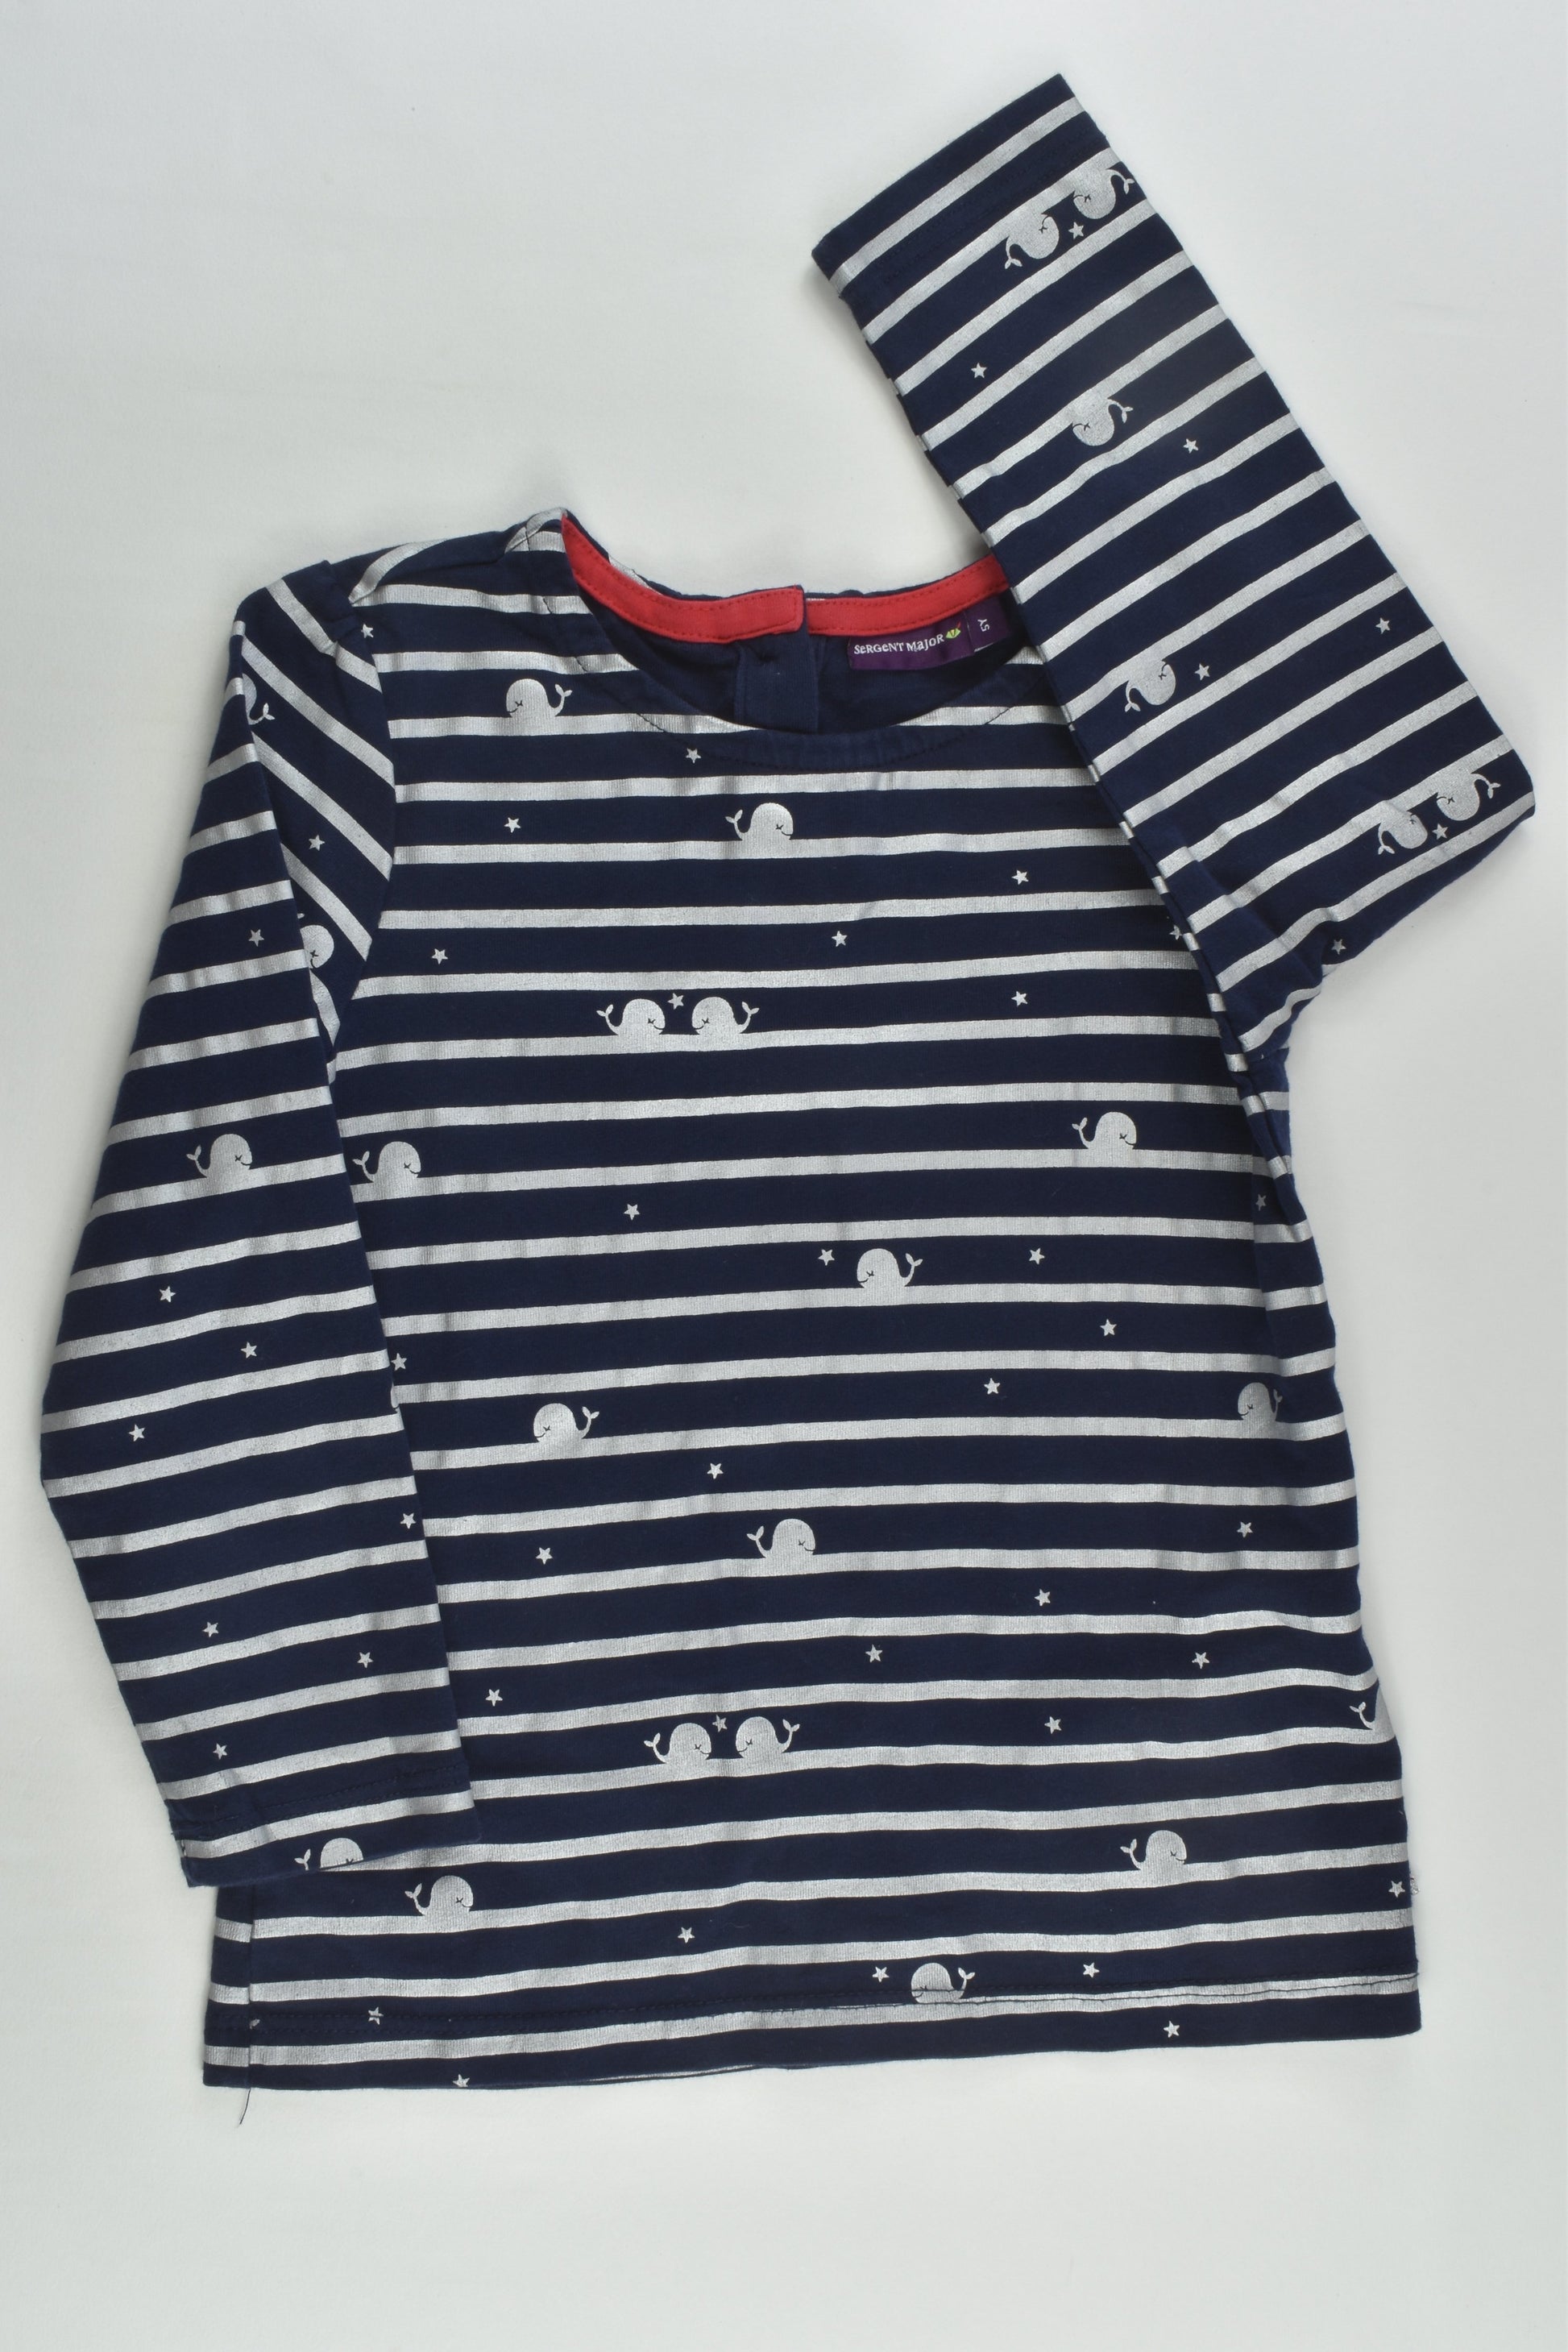 Sergent Major Size 4-5 (5 years) Whale Top